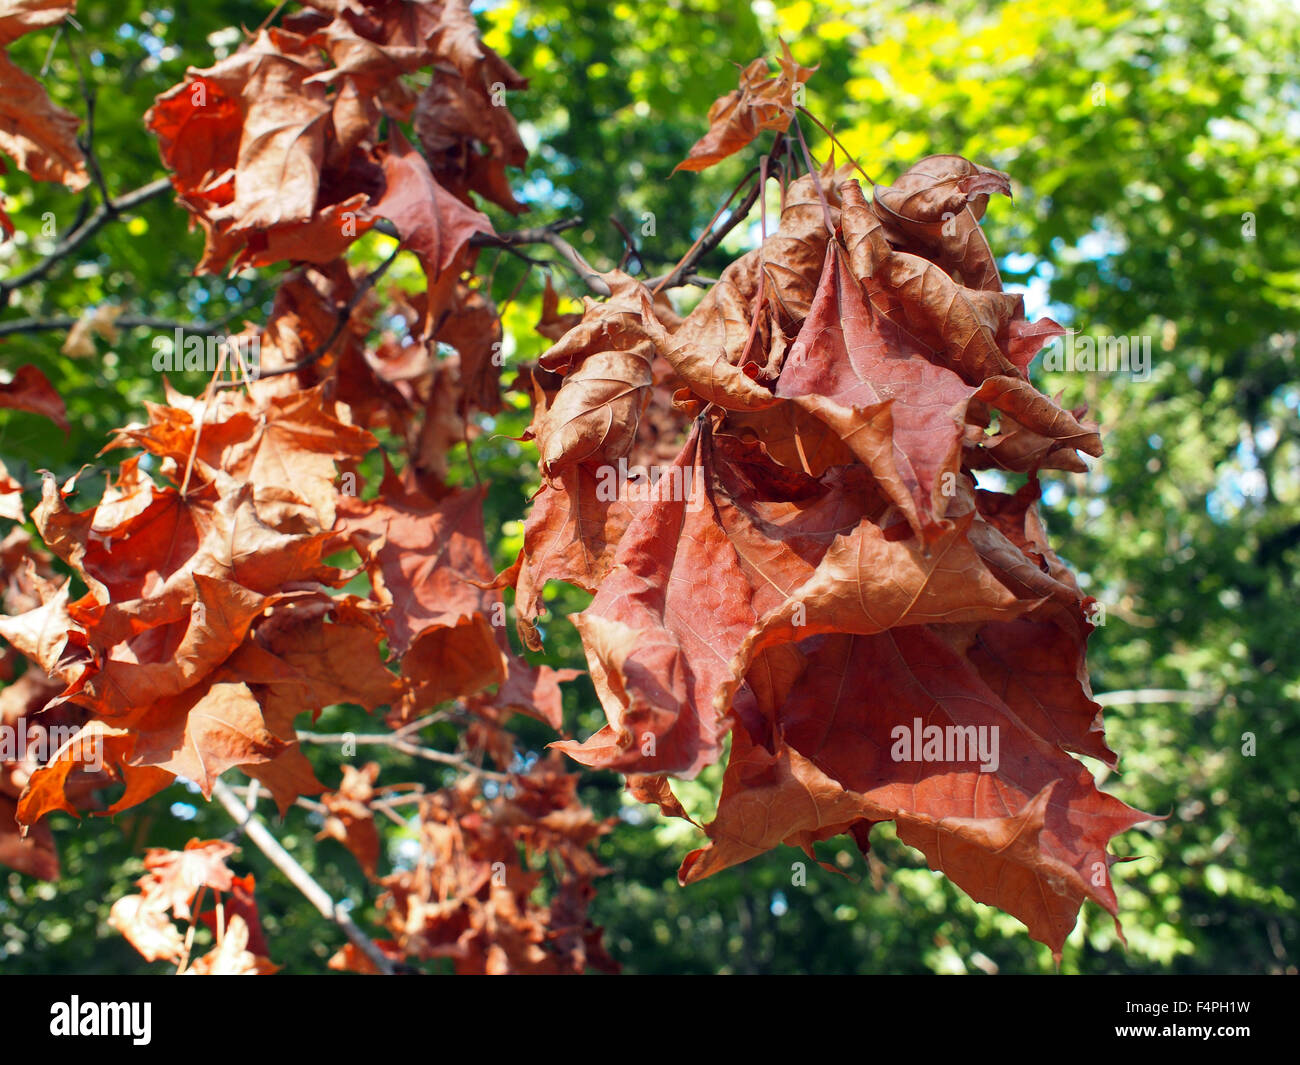 Selective focus on maple branch with dried leaves brown close-up on a background of green foliage. Stock Photo